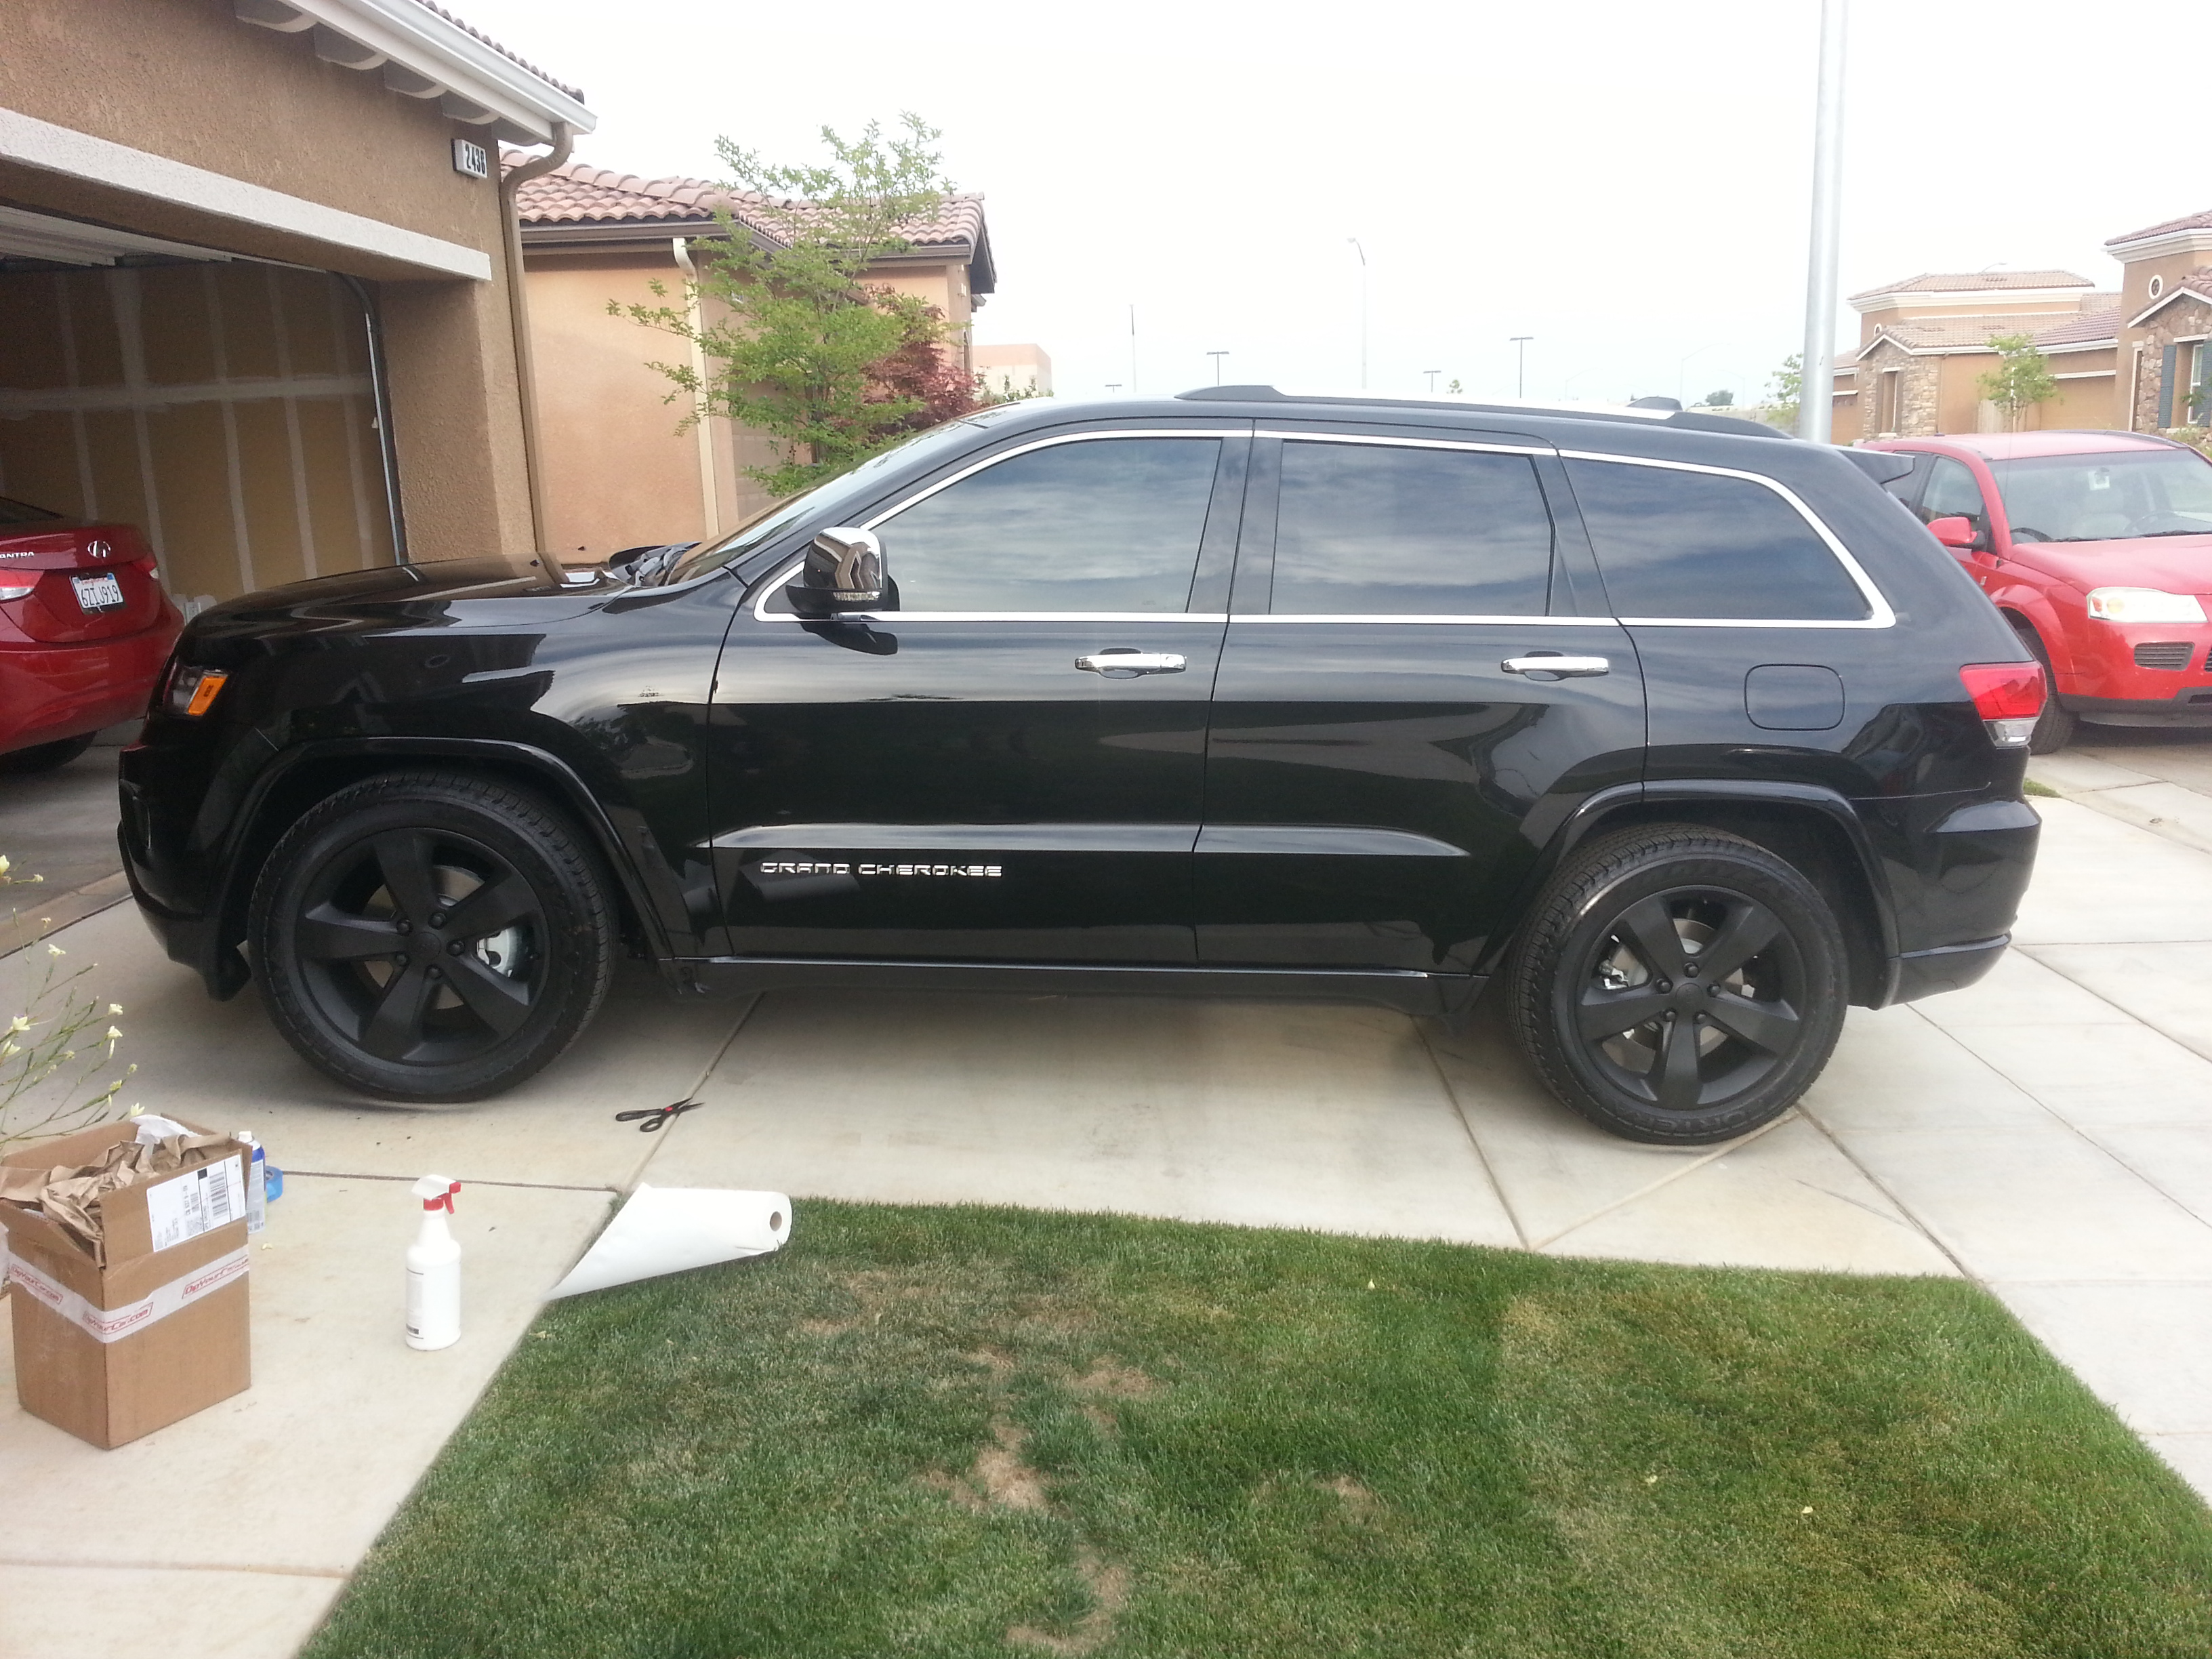 2012 Jeep grand cherokee srt8 lease rates